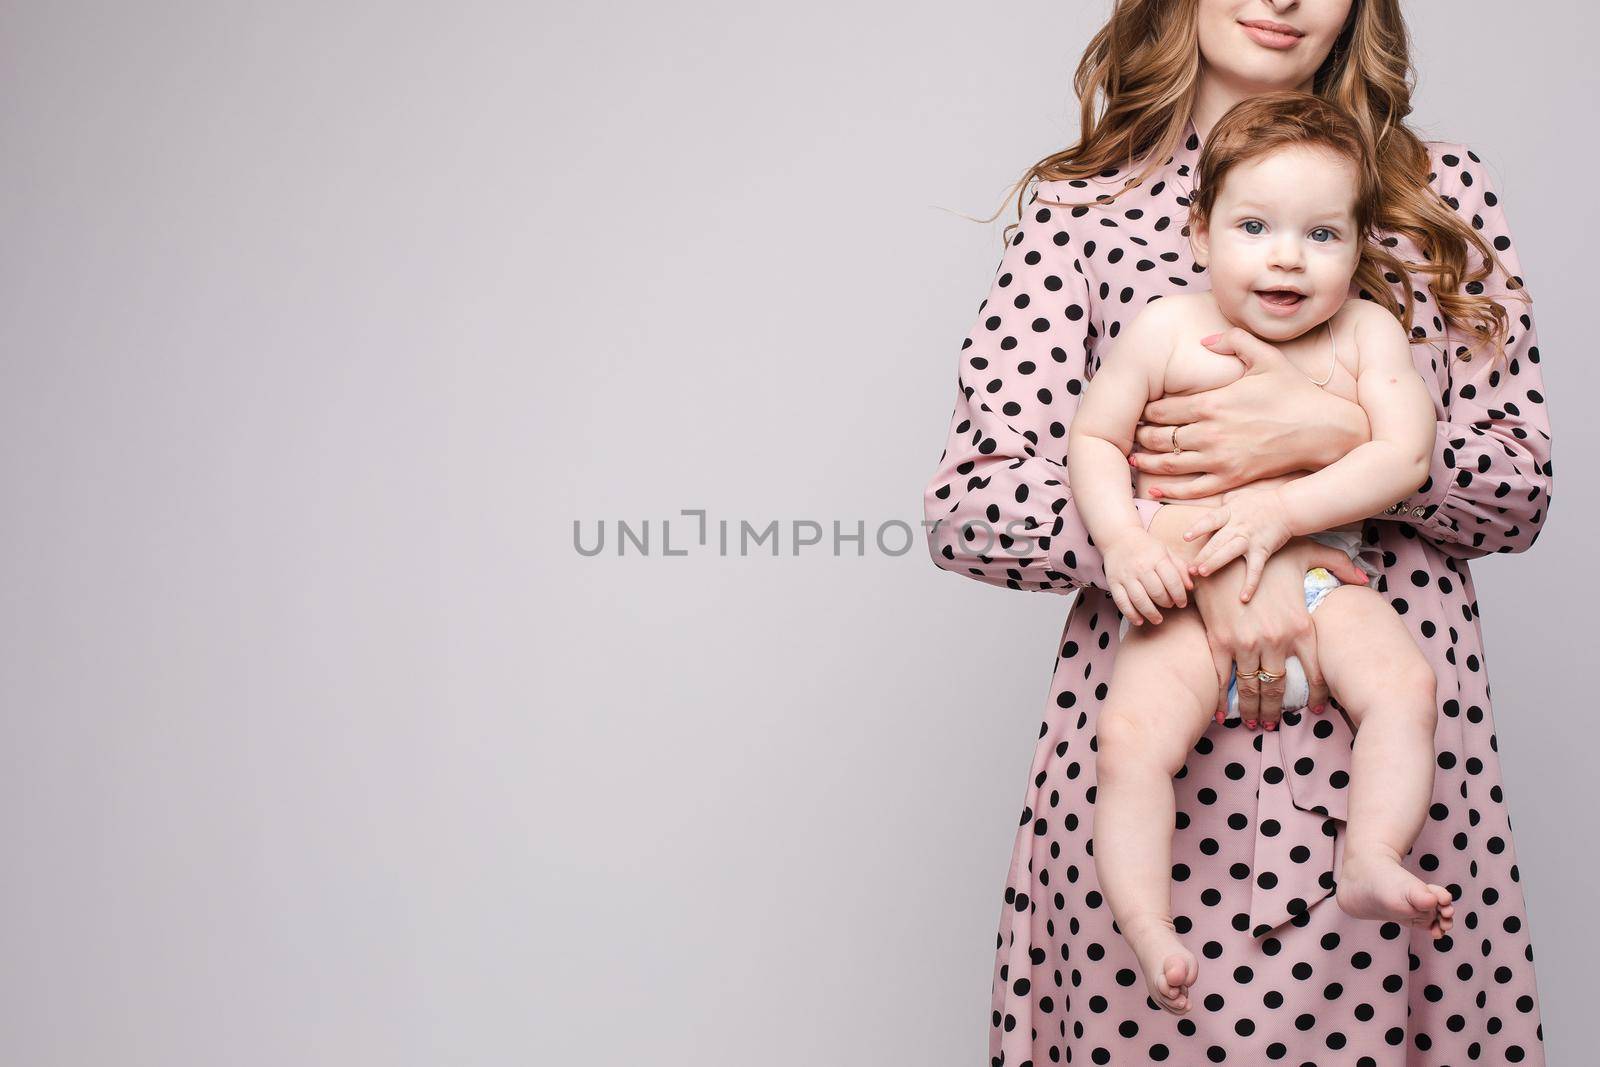 A beautiful family with a small child in the studio on a gray background. by StudioLucky